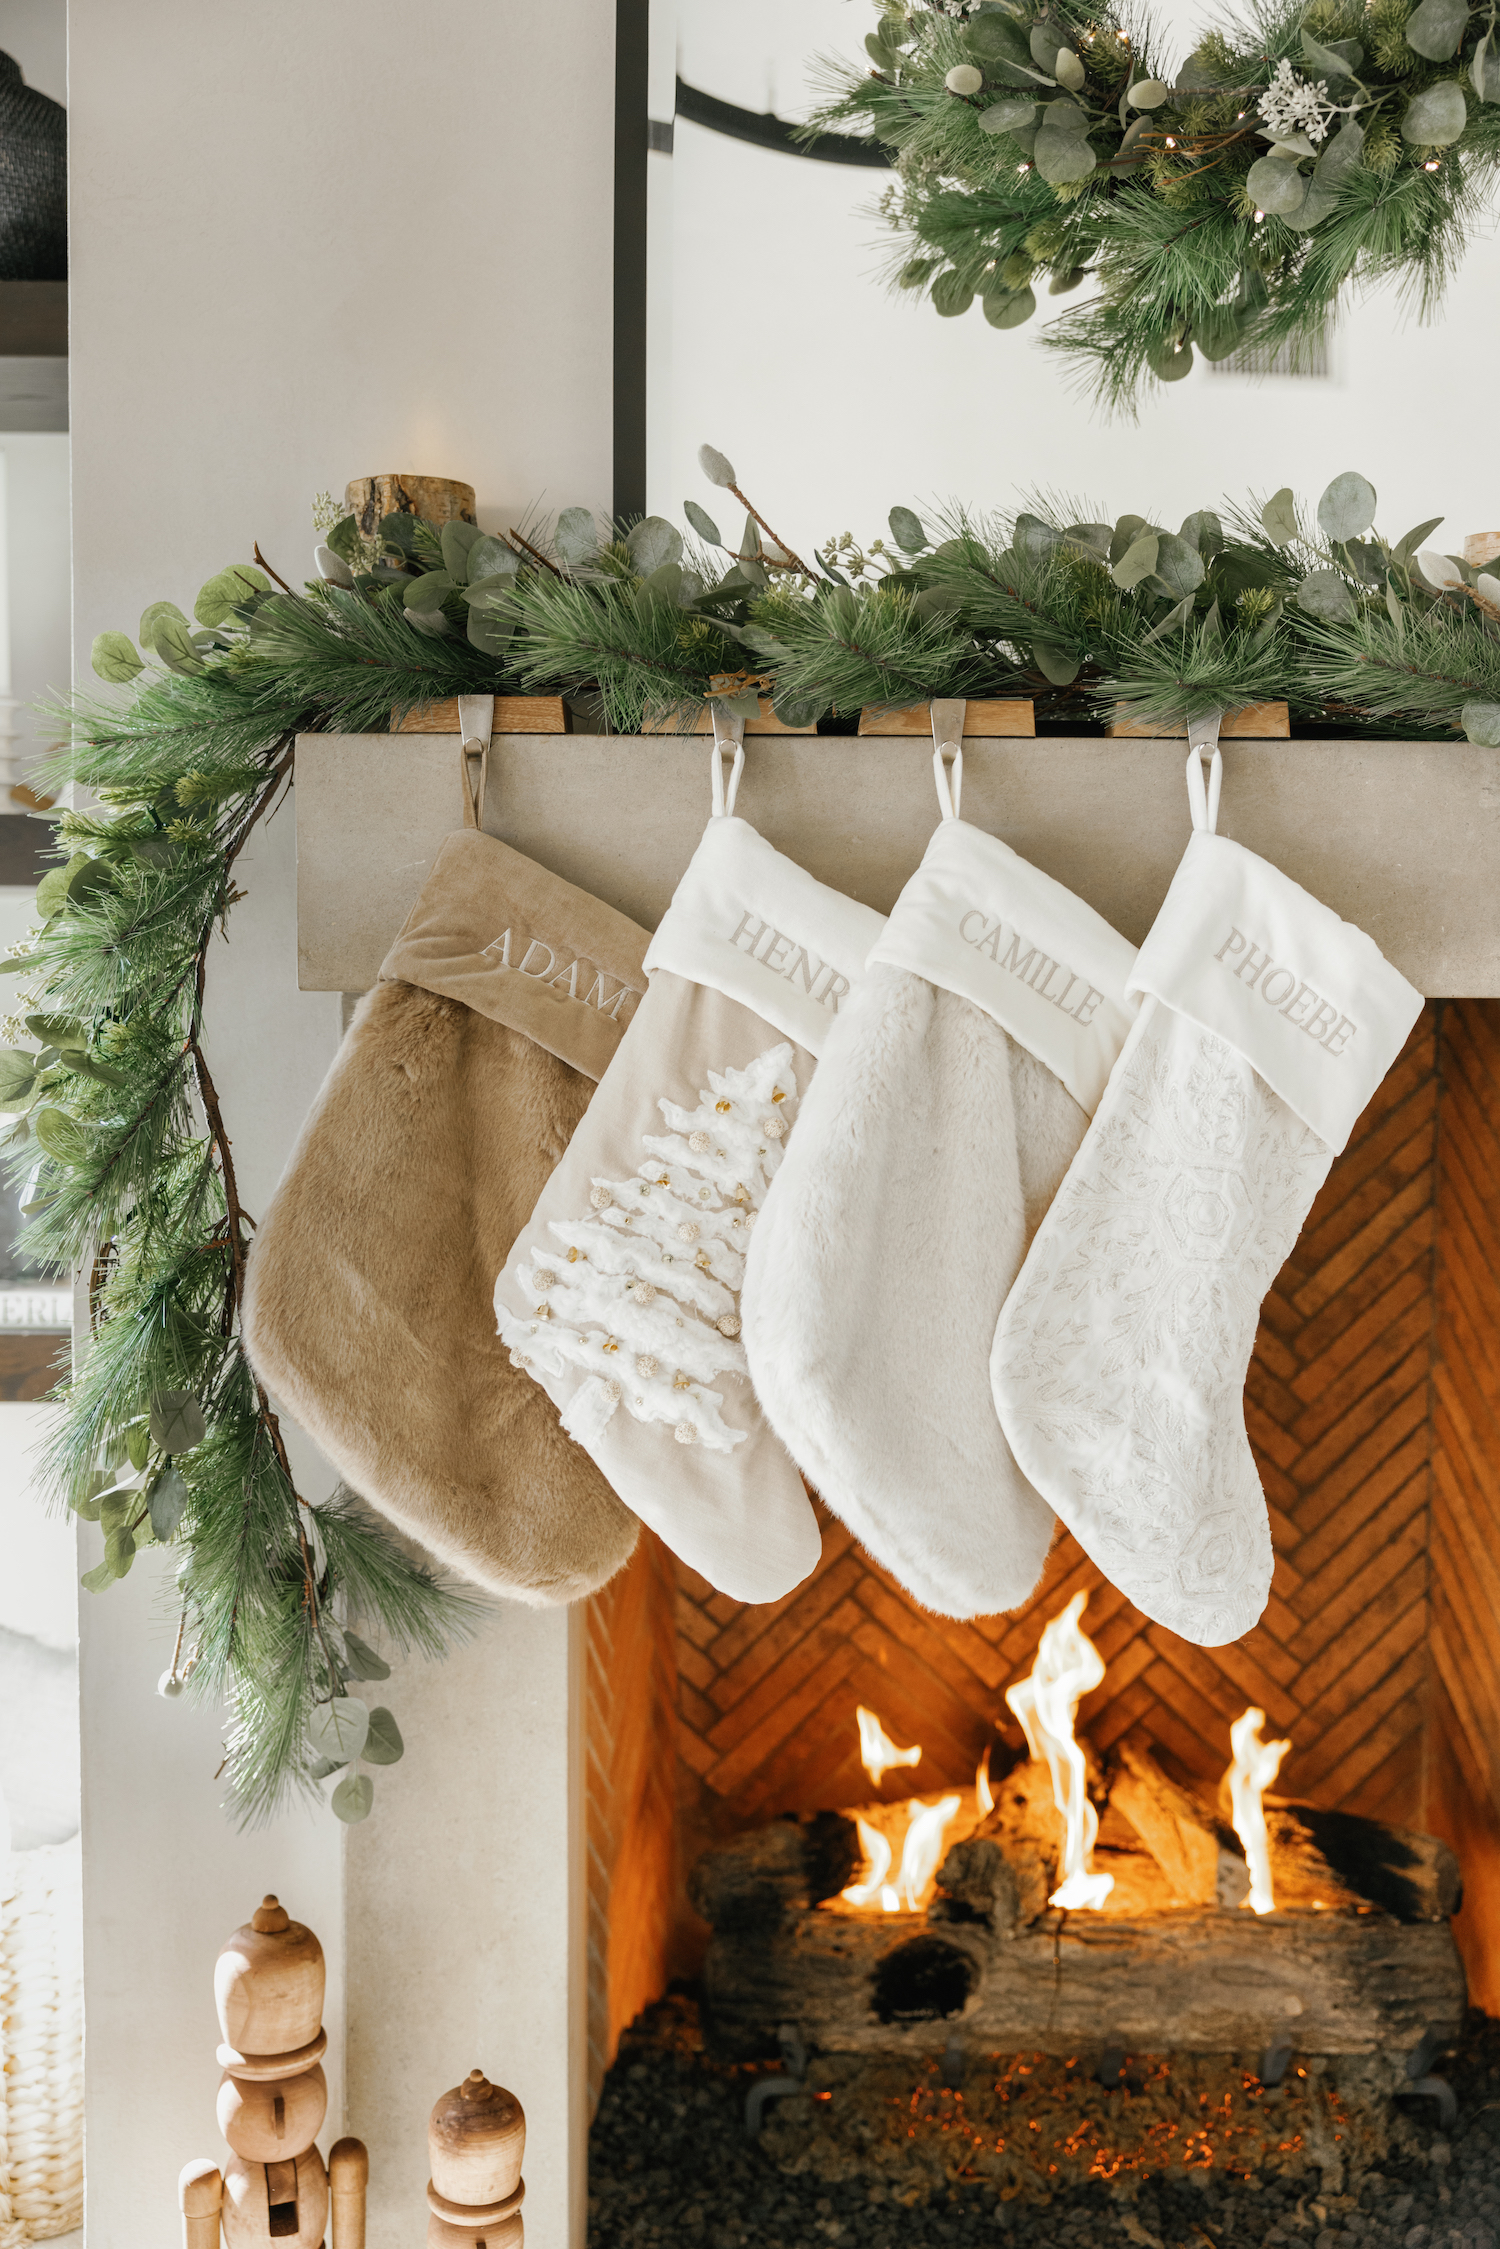 Camille Styles holiday decor greenery gamantel, hanging stockings